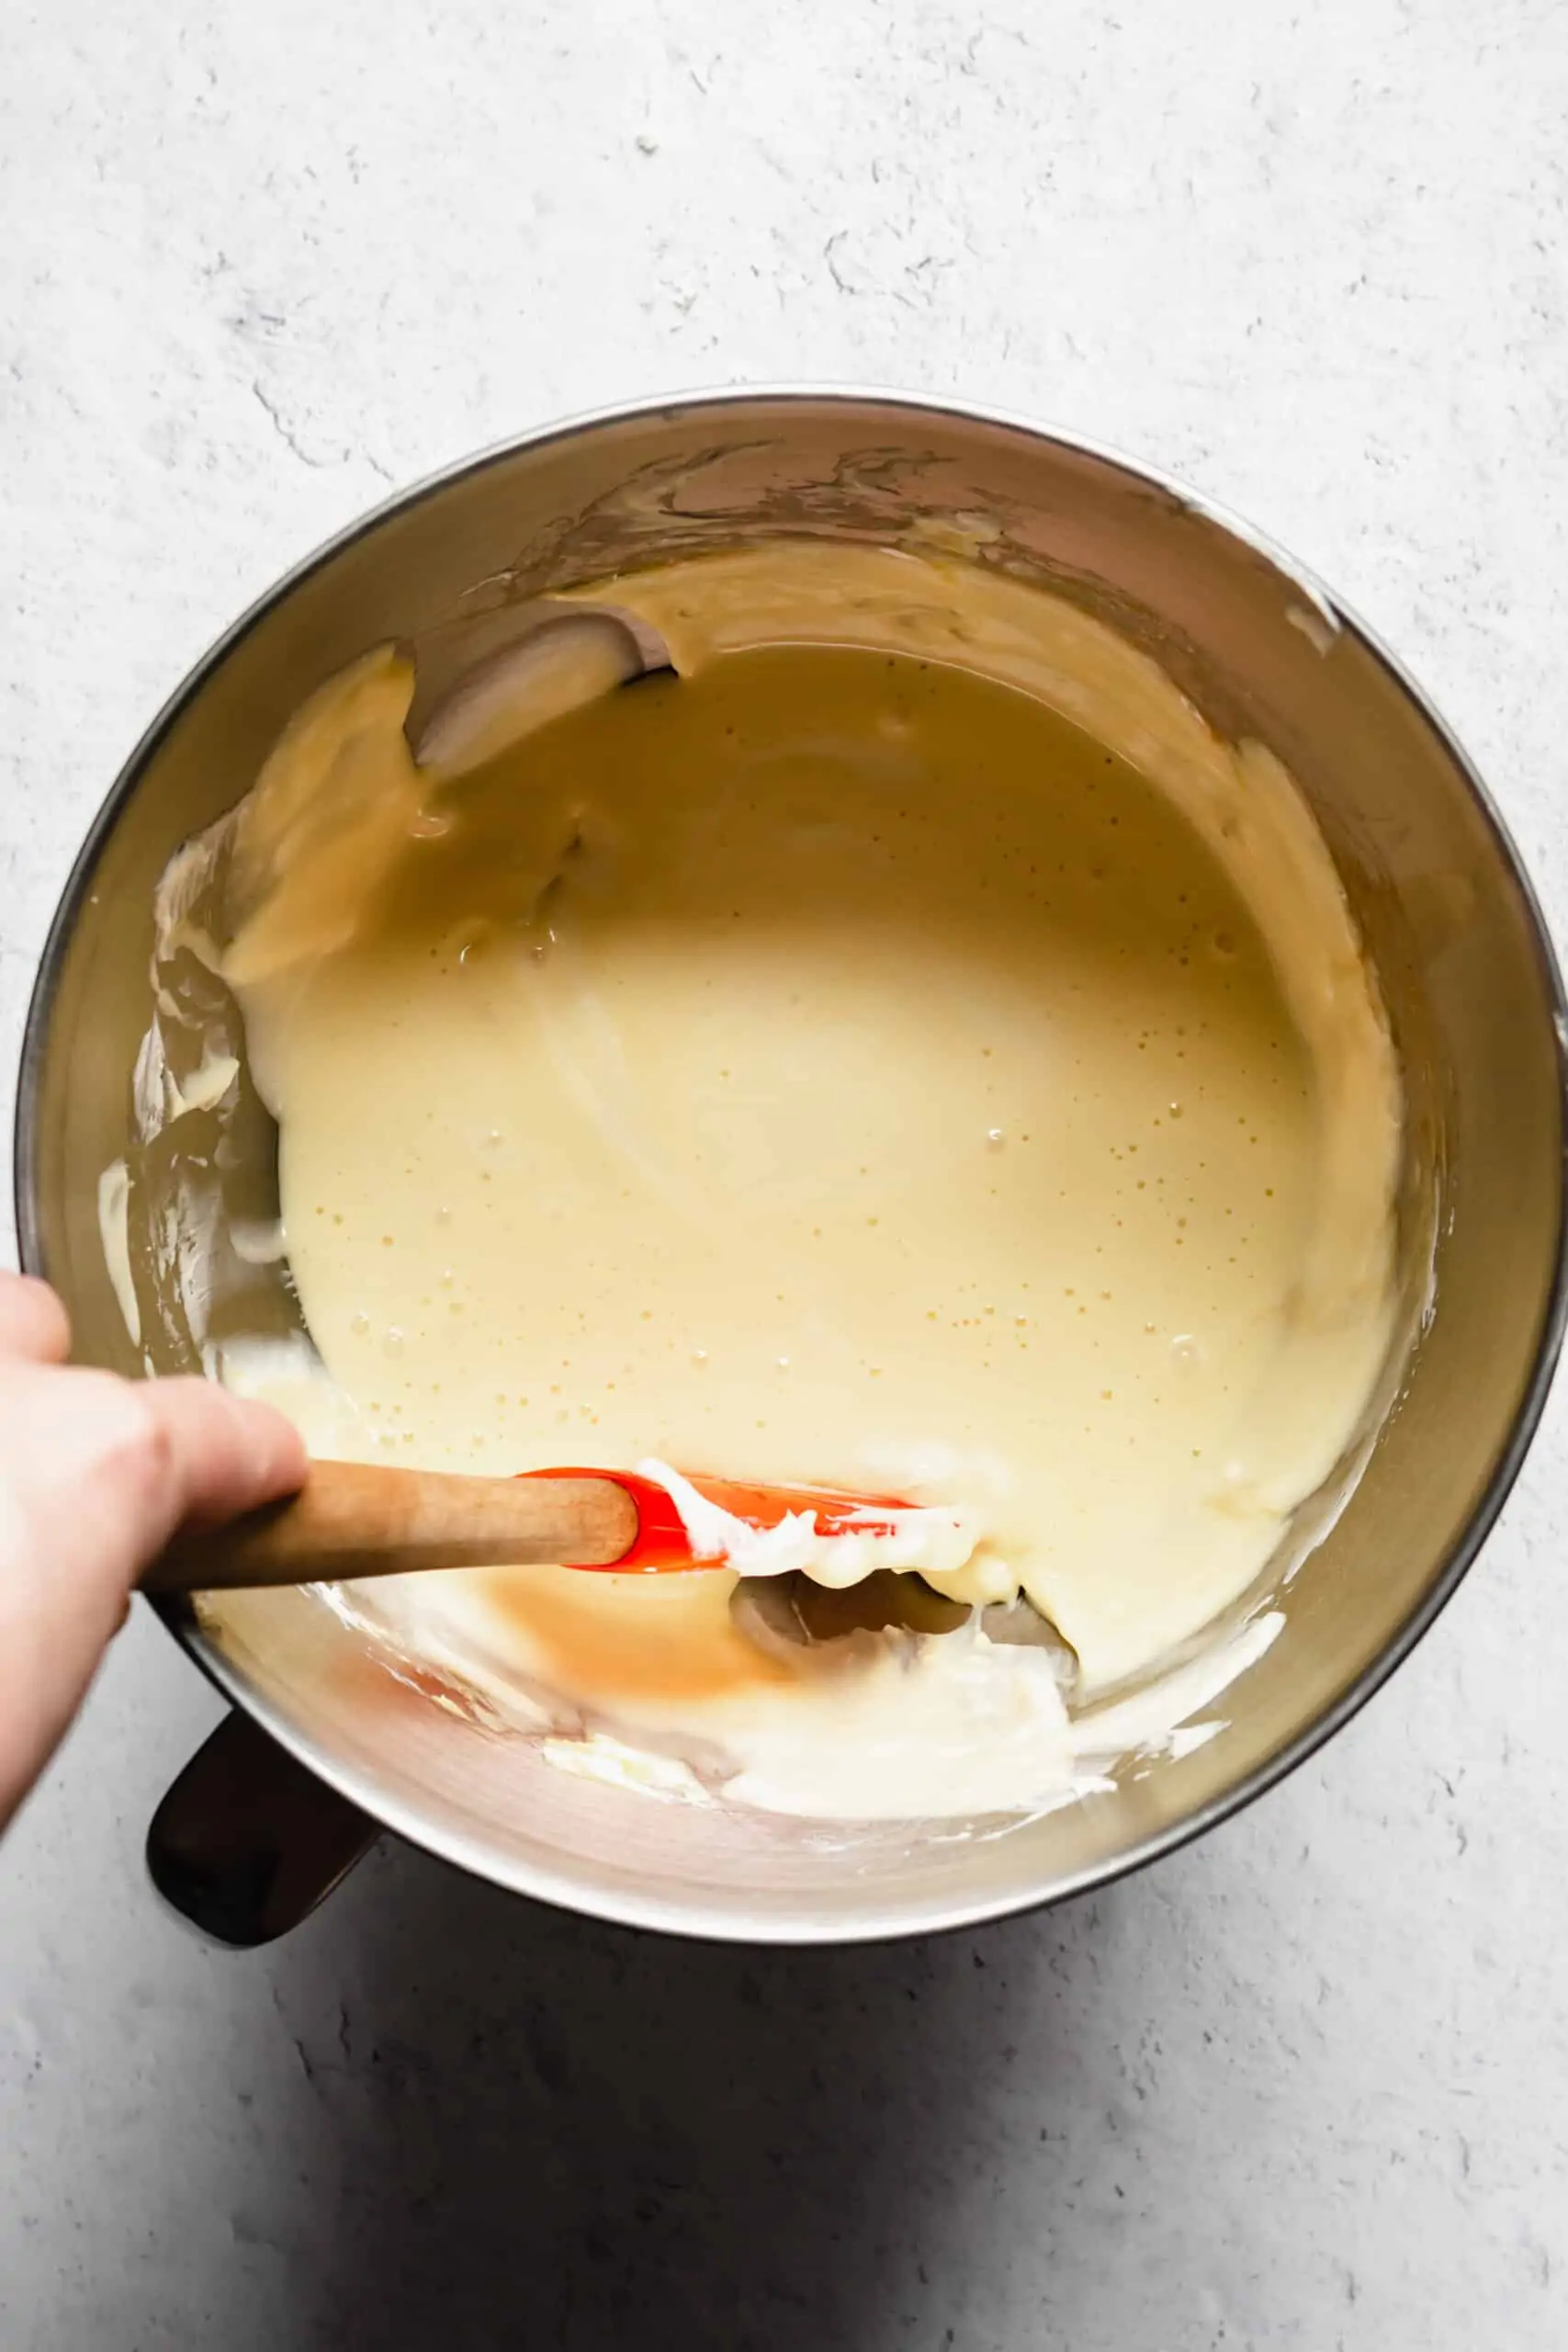 Cheesecake batter in a bowl with sides being scraped down.